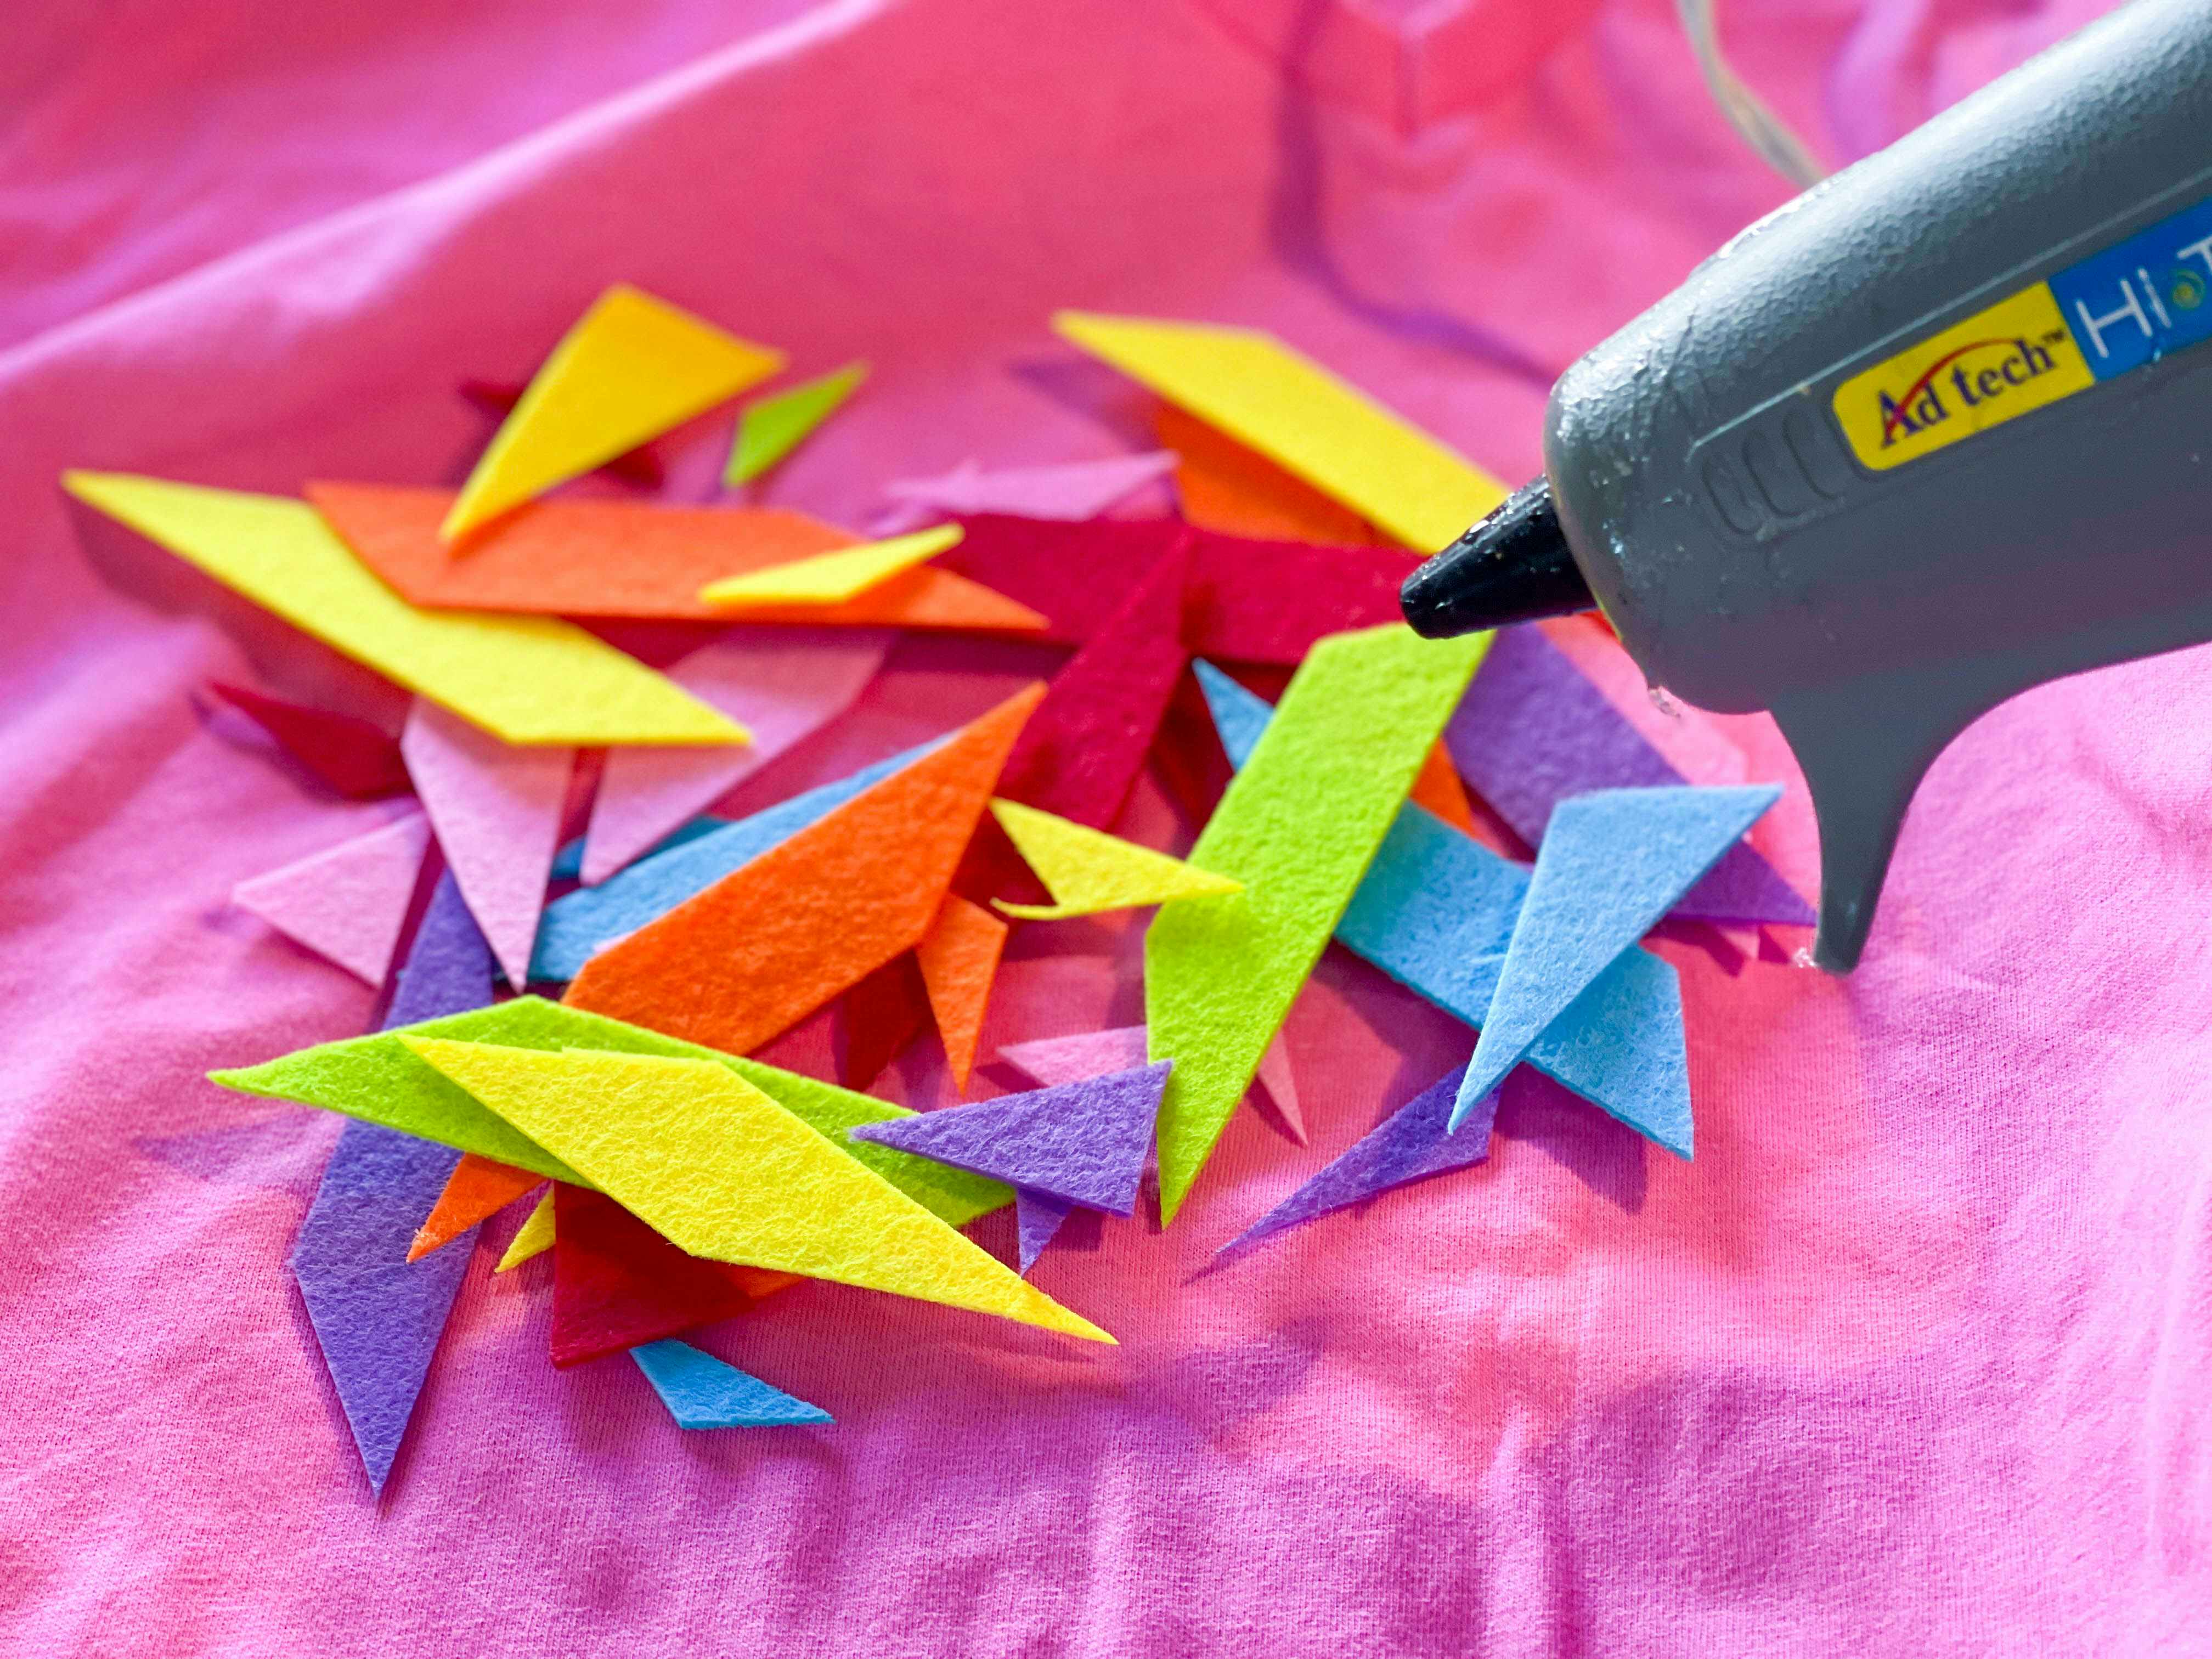 A hot glue gun near some cut-out shapes for sprinkles on a DIY ice cream cone costume.